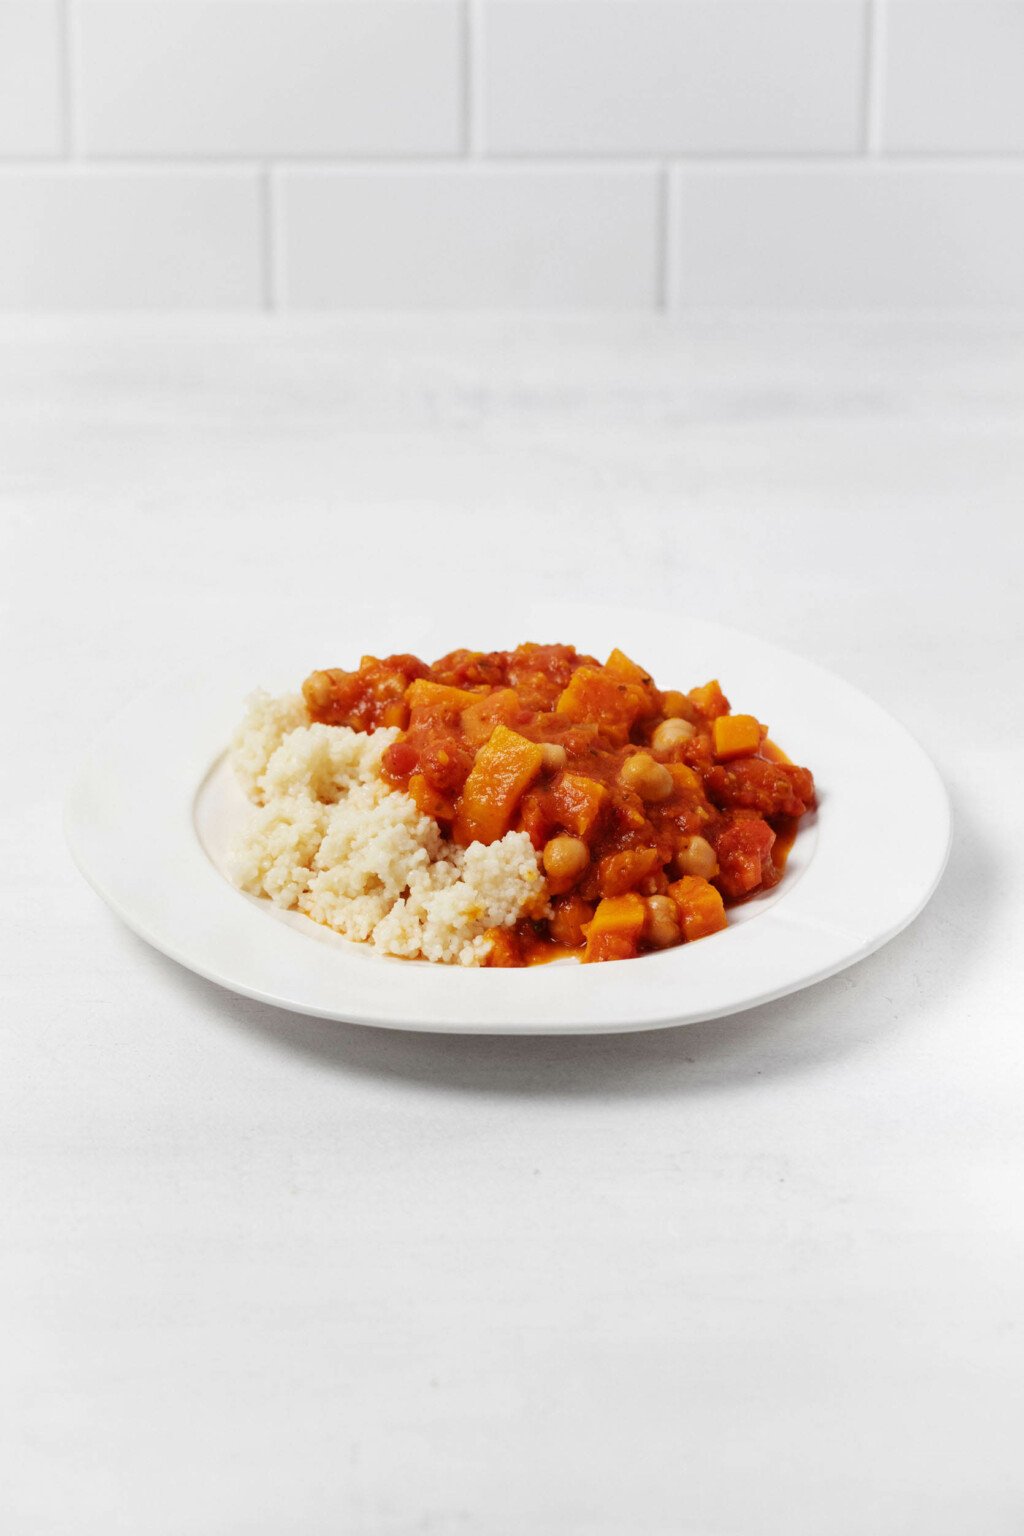 A rimmed, round white plate rests on a white surface.  It is topped with a mixture of tomatoes, squash and chickpeas.